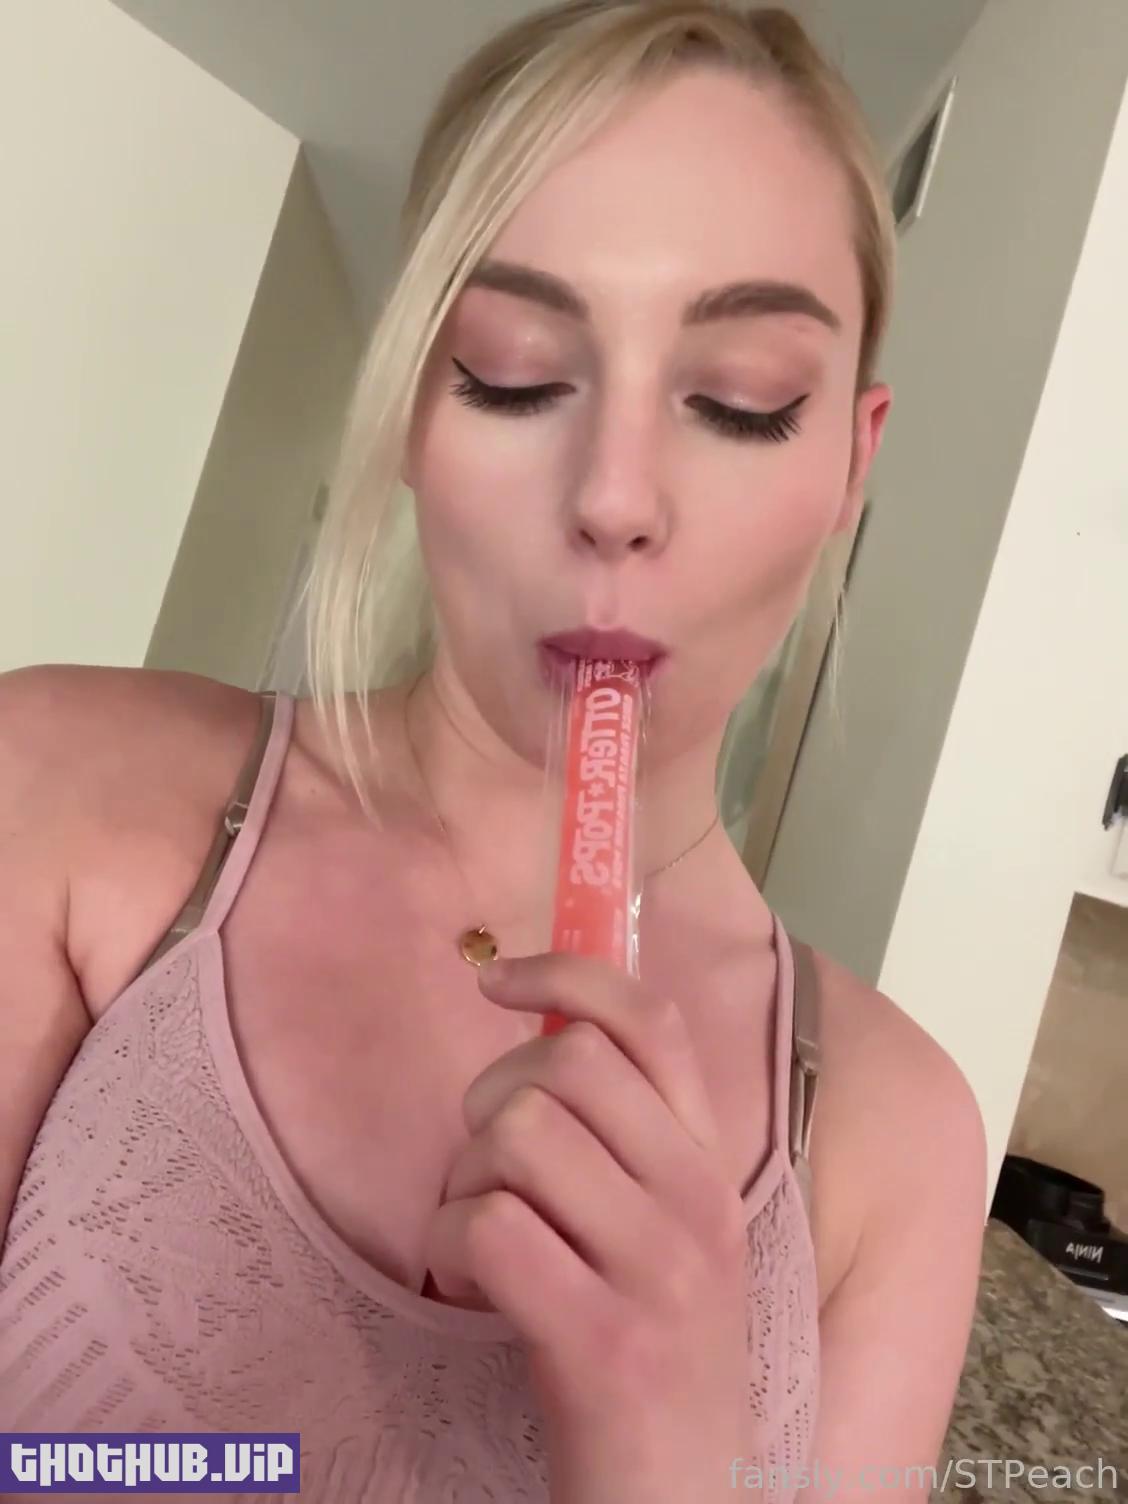 1662762070 427 STPeach Popsicle Sucking Fansly Video Leaked